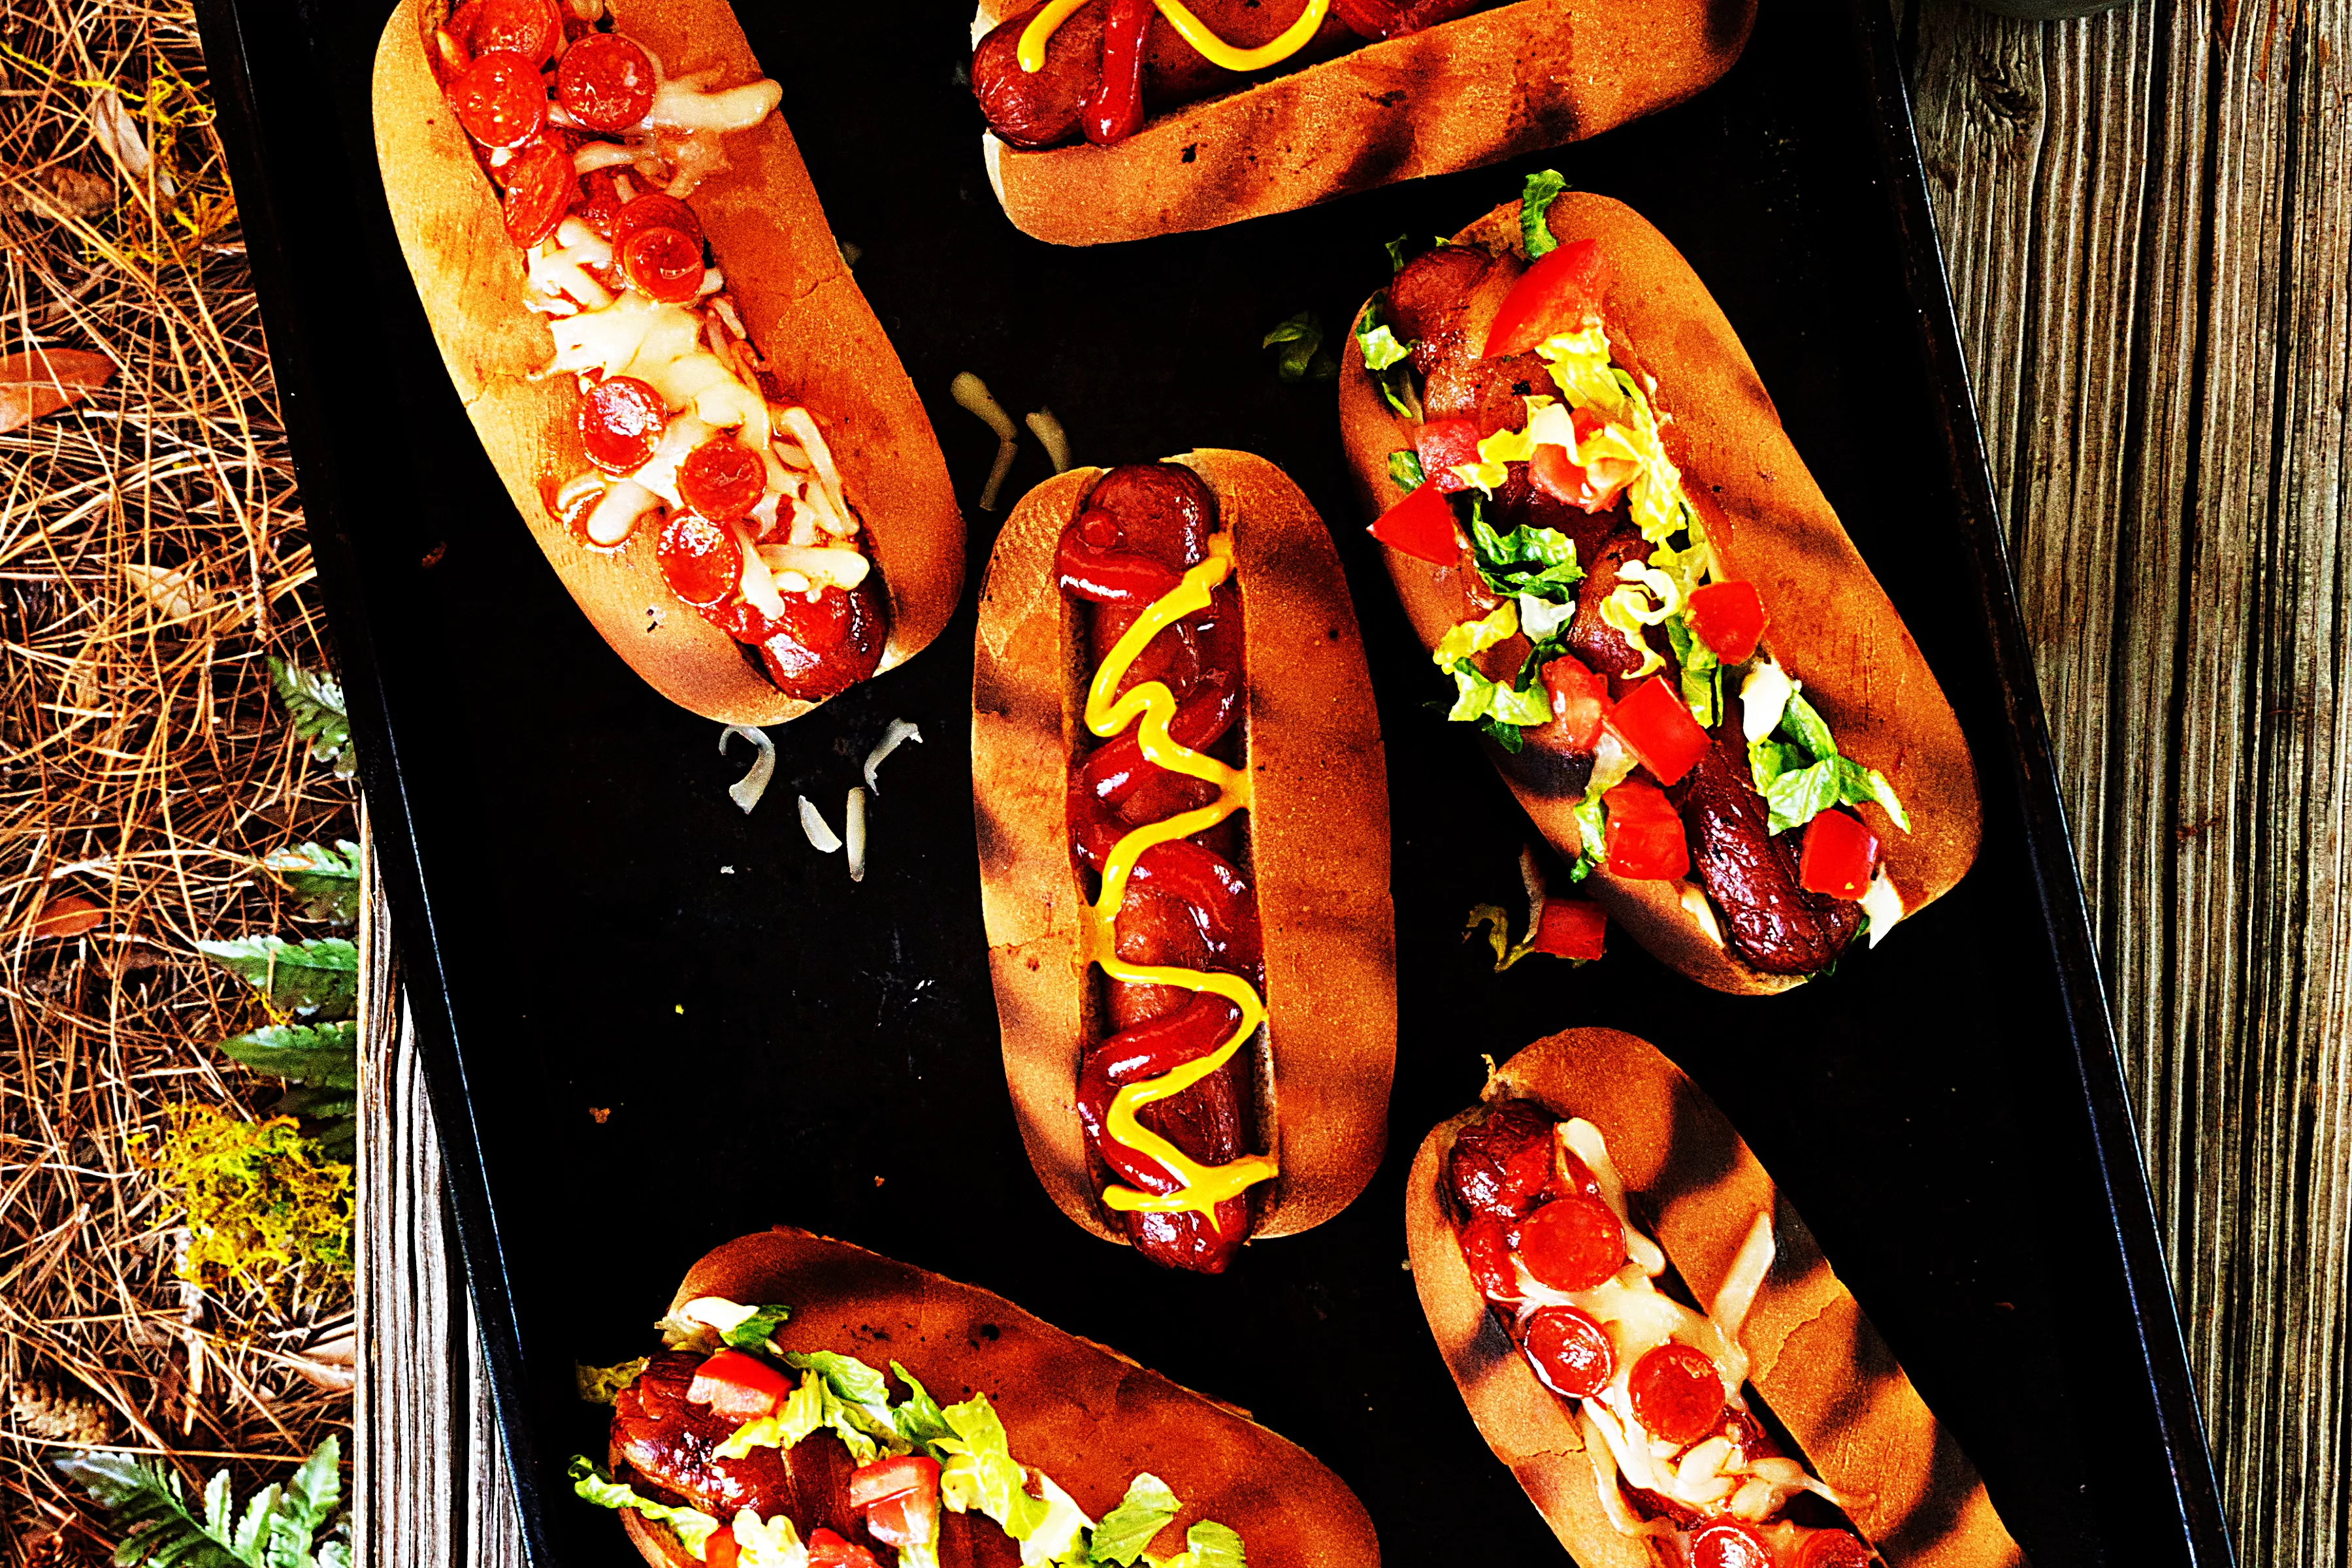 Stupid-Easy Recipe for Campfire Hot Dogs Three Ways (#1 Top-Rated)